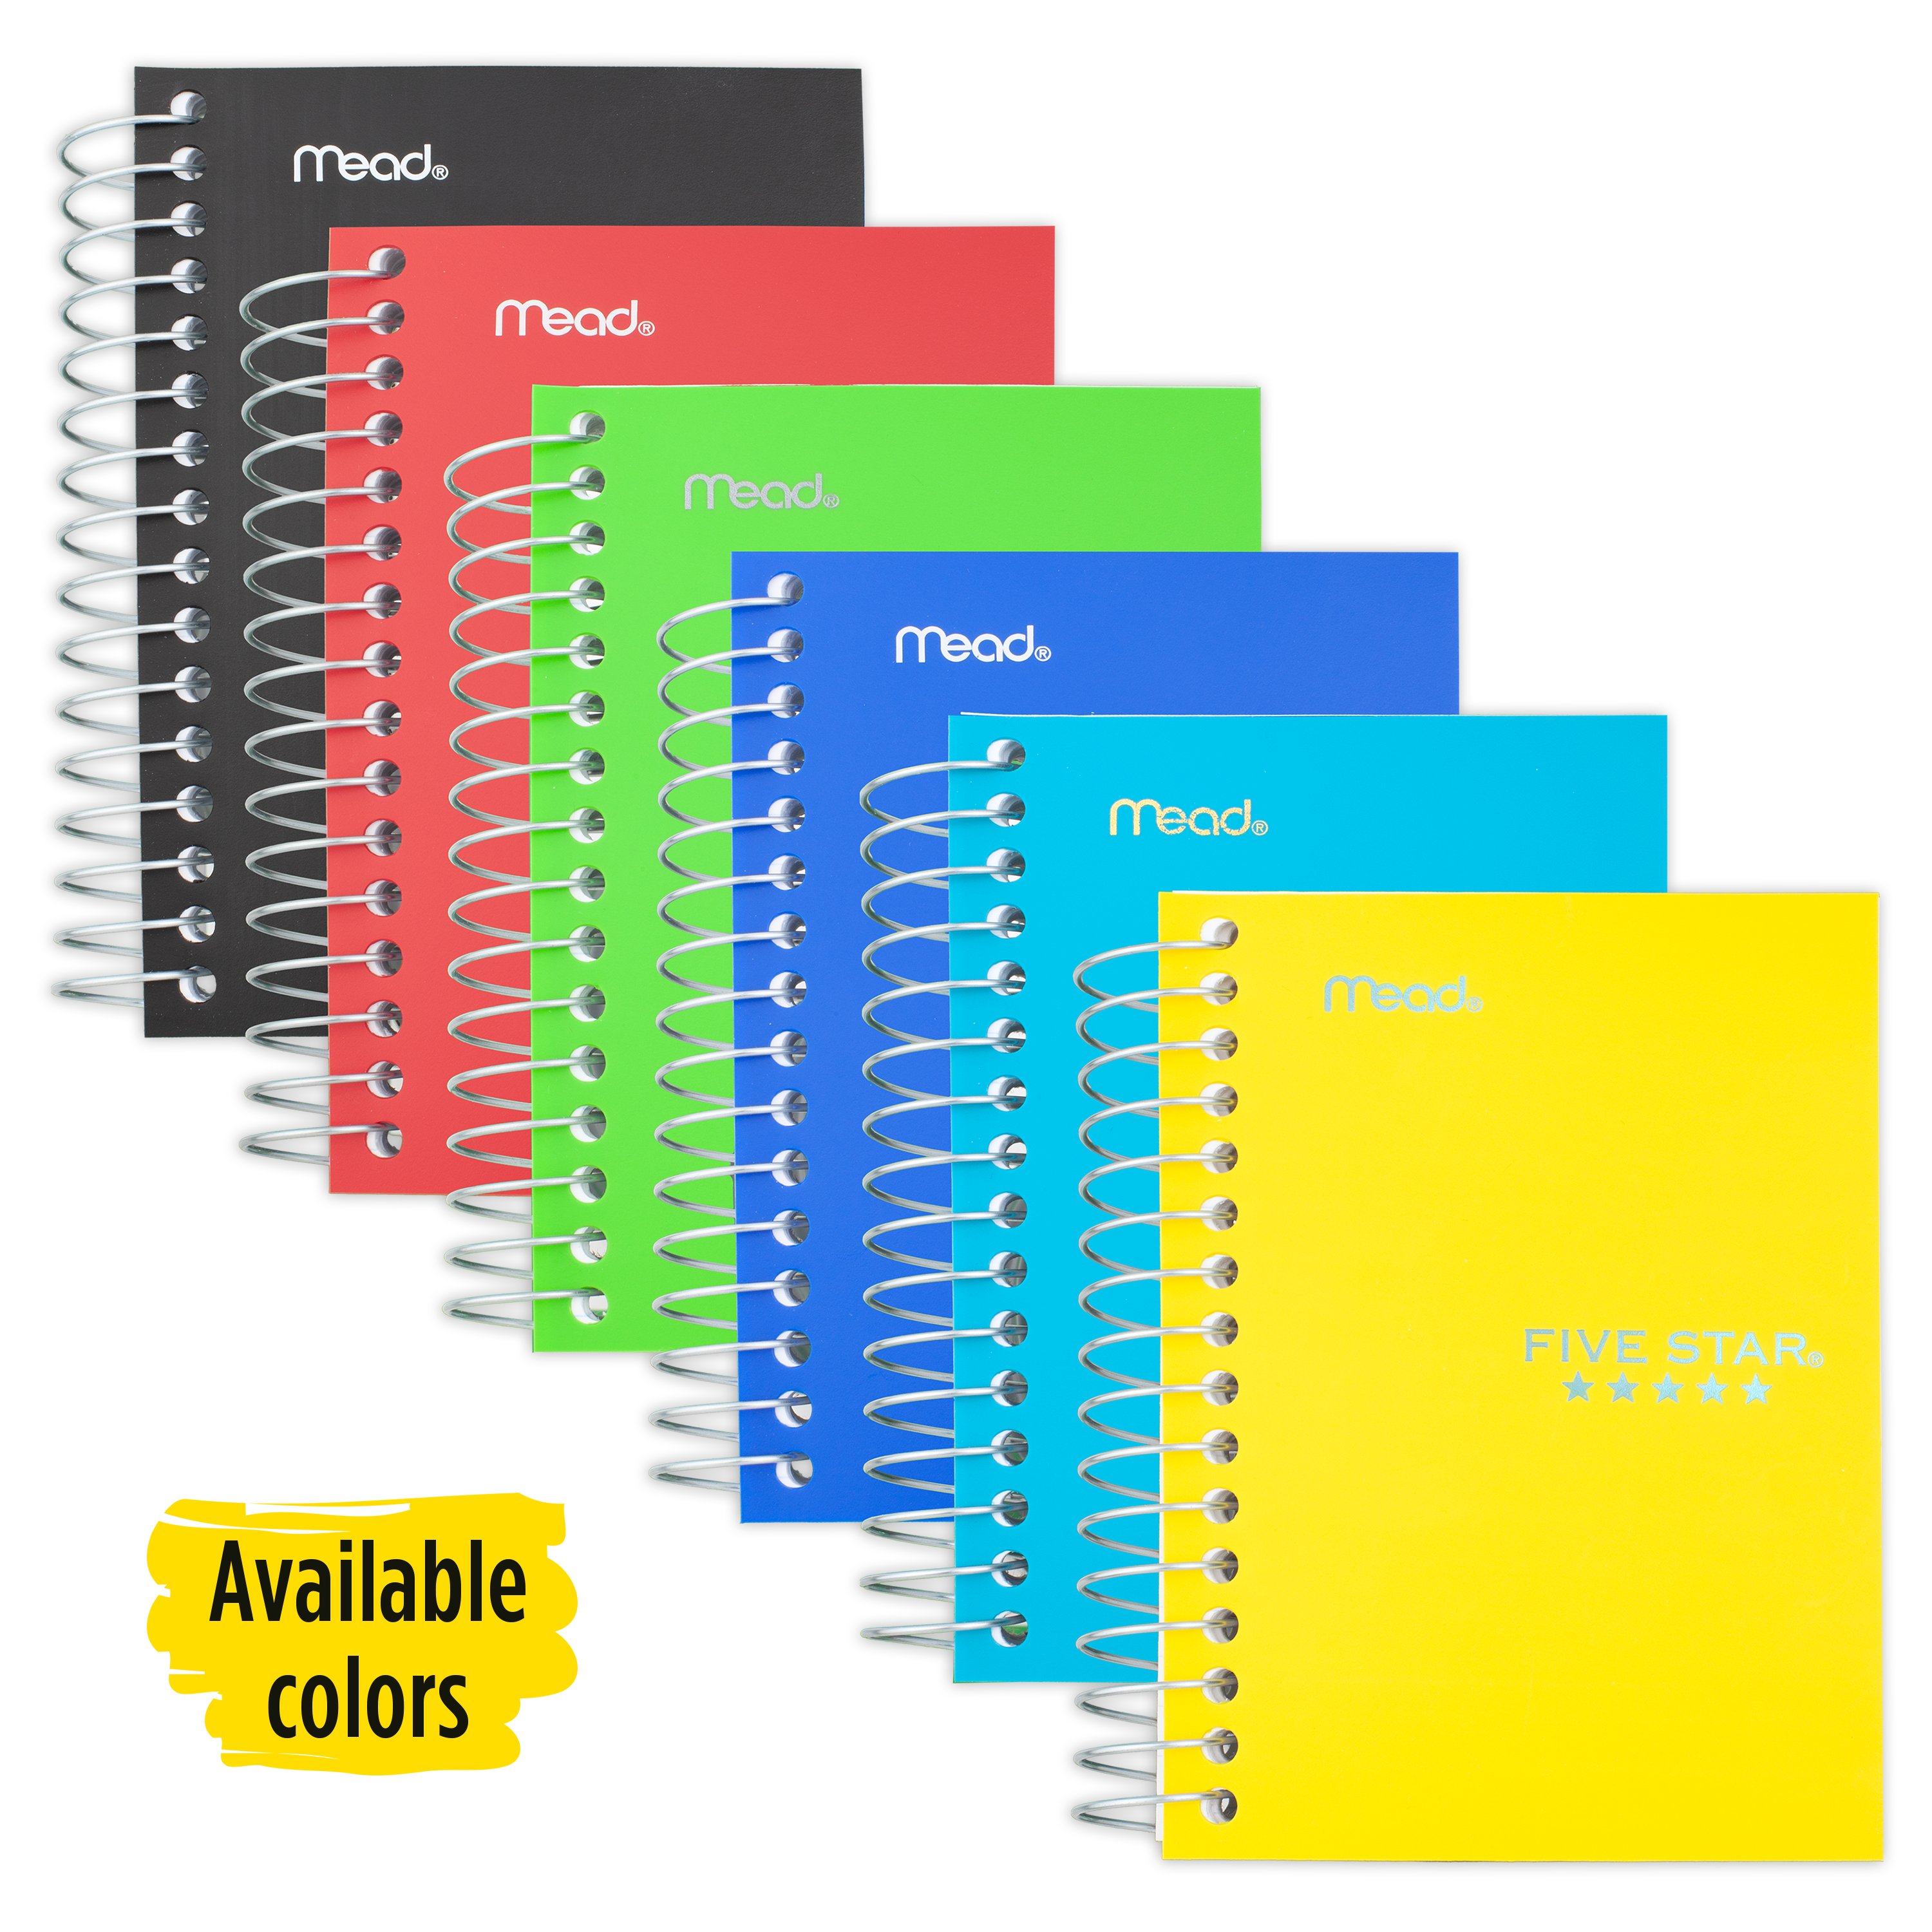 Five Star Fat Lil' College Ruled Wirebound Notebook, 5 1/2" x 4", Color Choice Will Vary (45377) - image 2 of 10